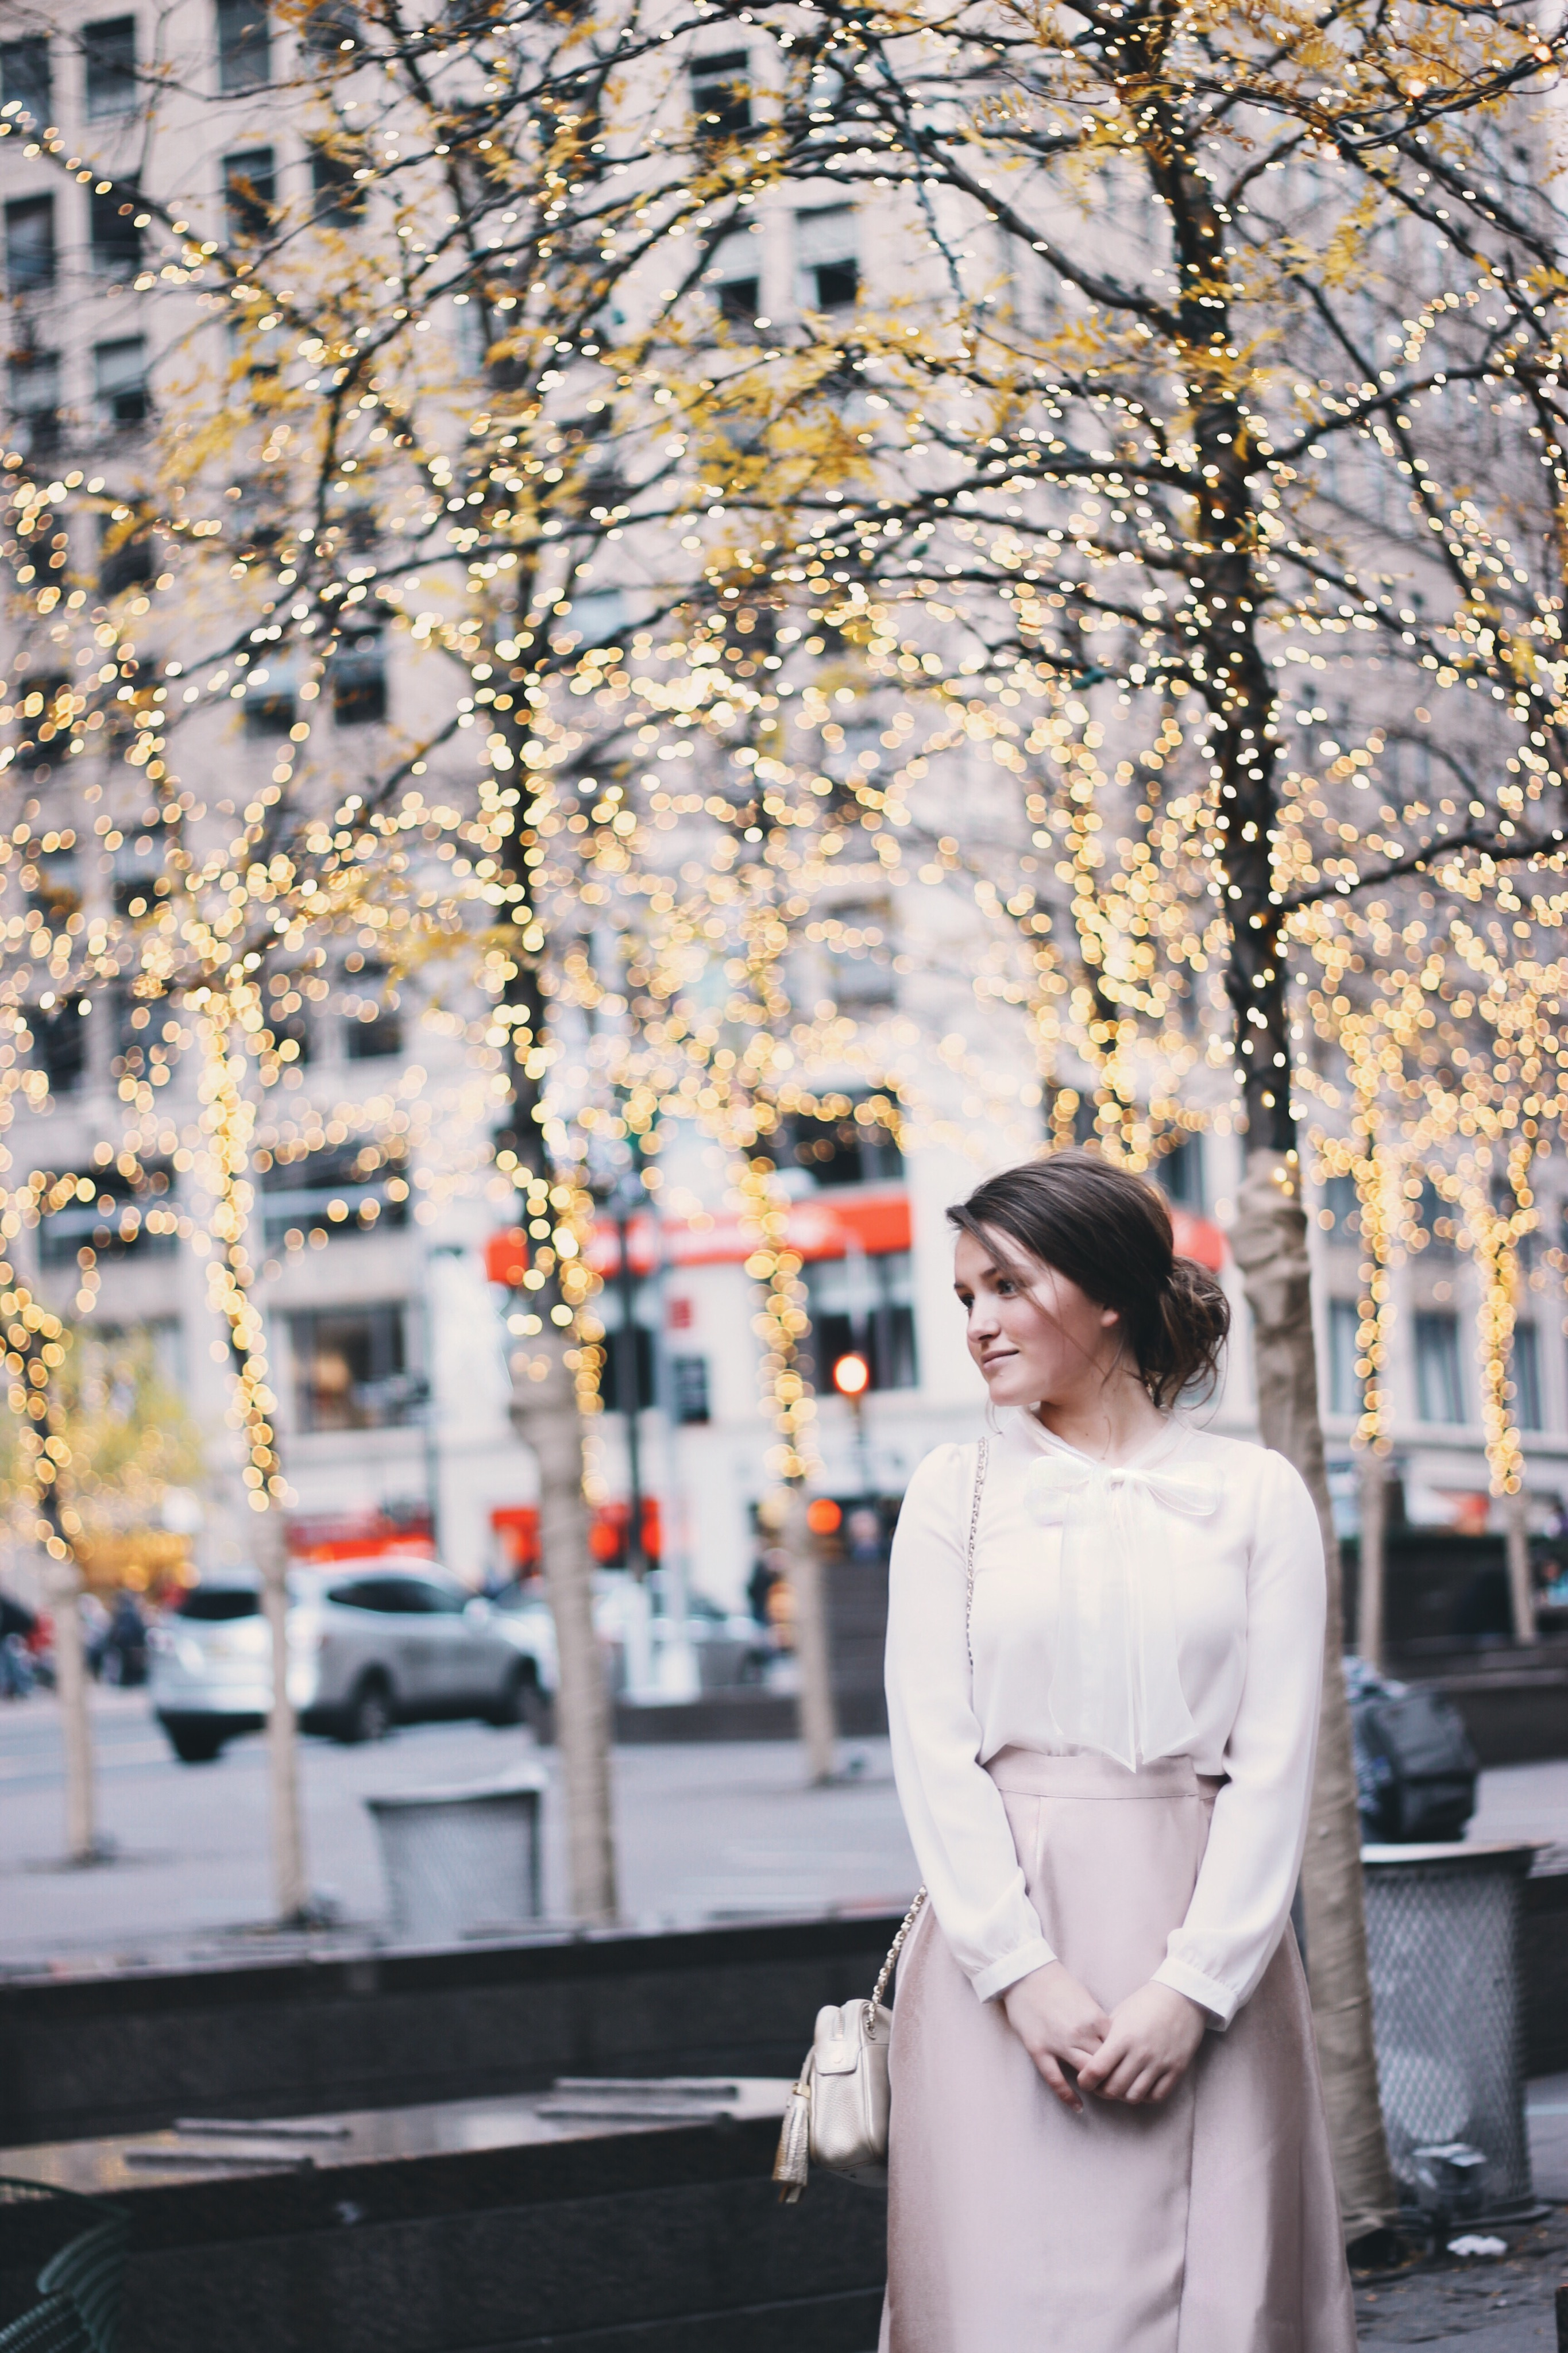 Christmas Outfit Inspiration | Courtney Toliver on @ShesIntentional